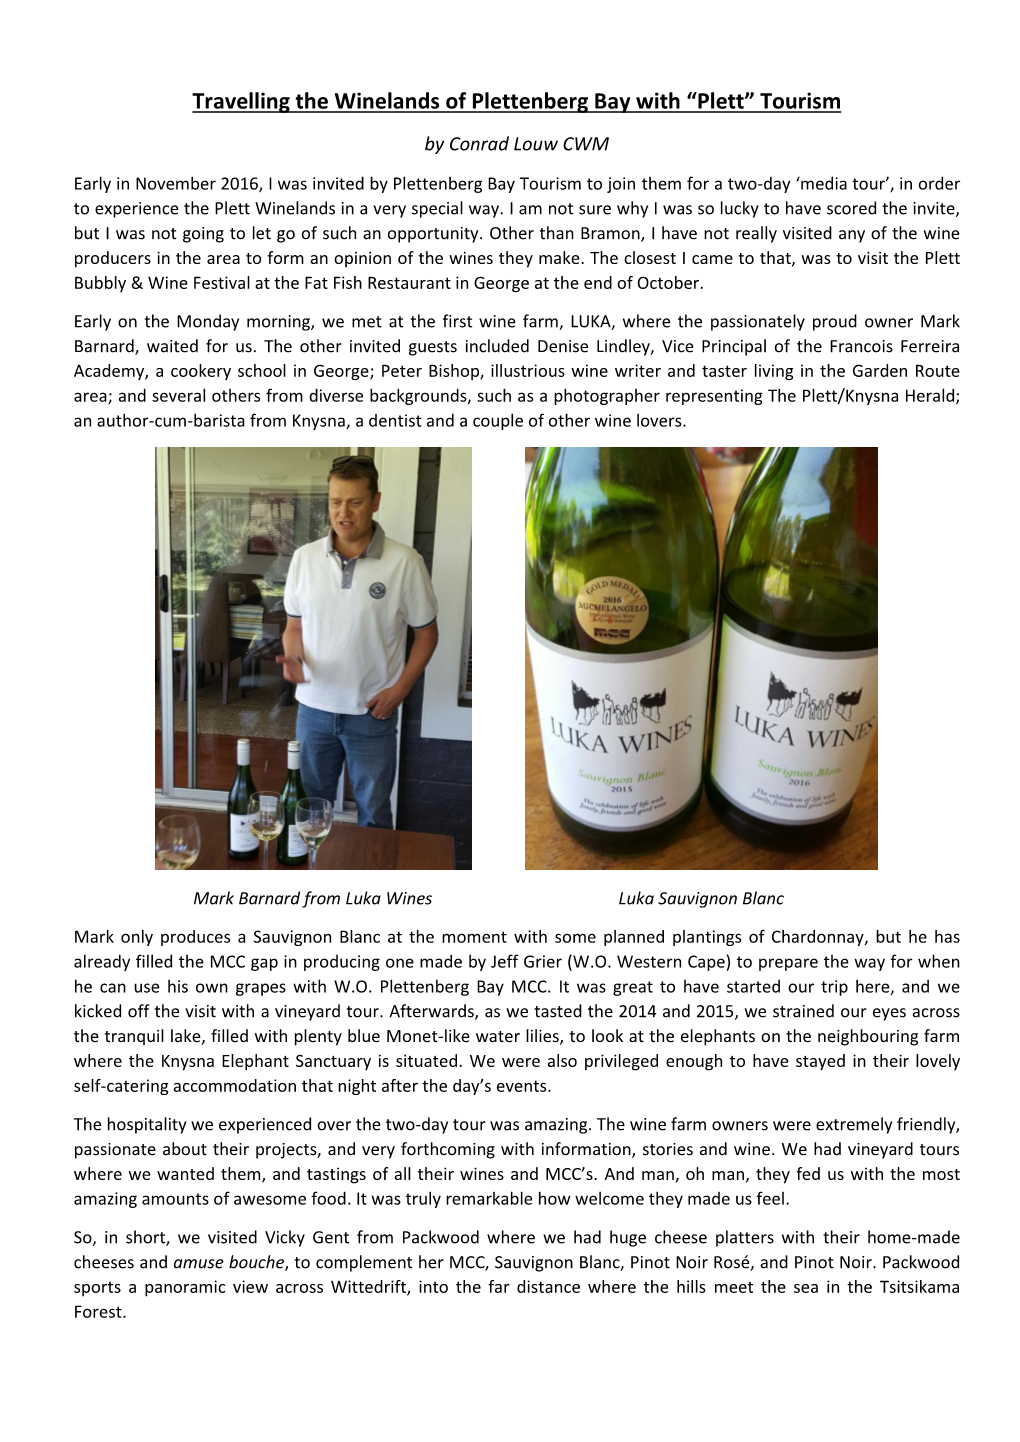 Travelling the Winelands of Plettenberg Bay with “Plett” Tourism by Conrad Louw CWM